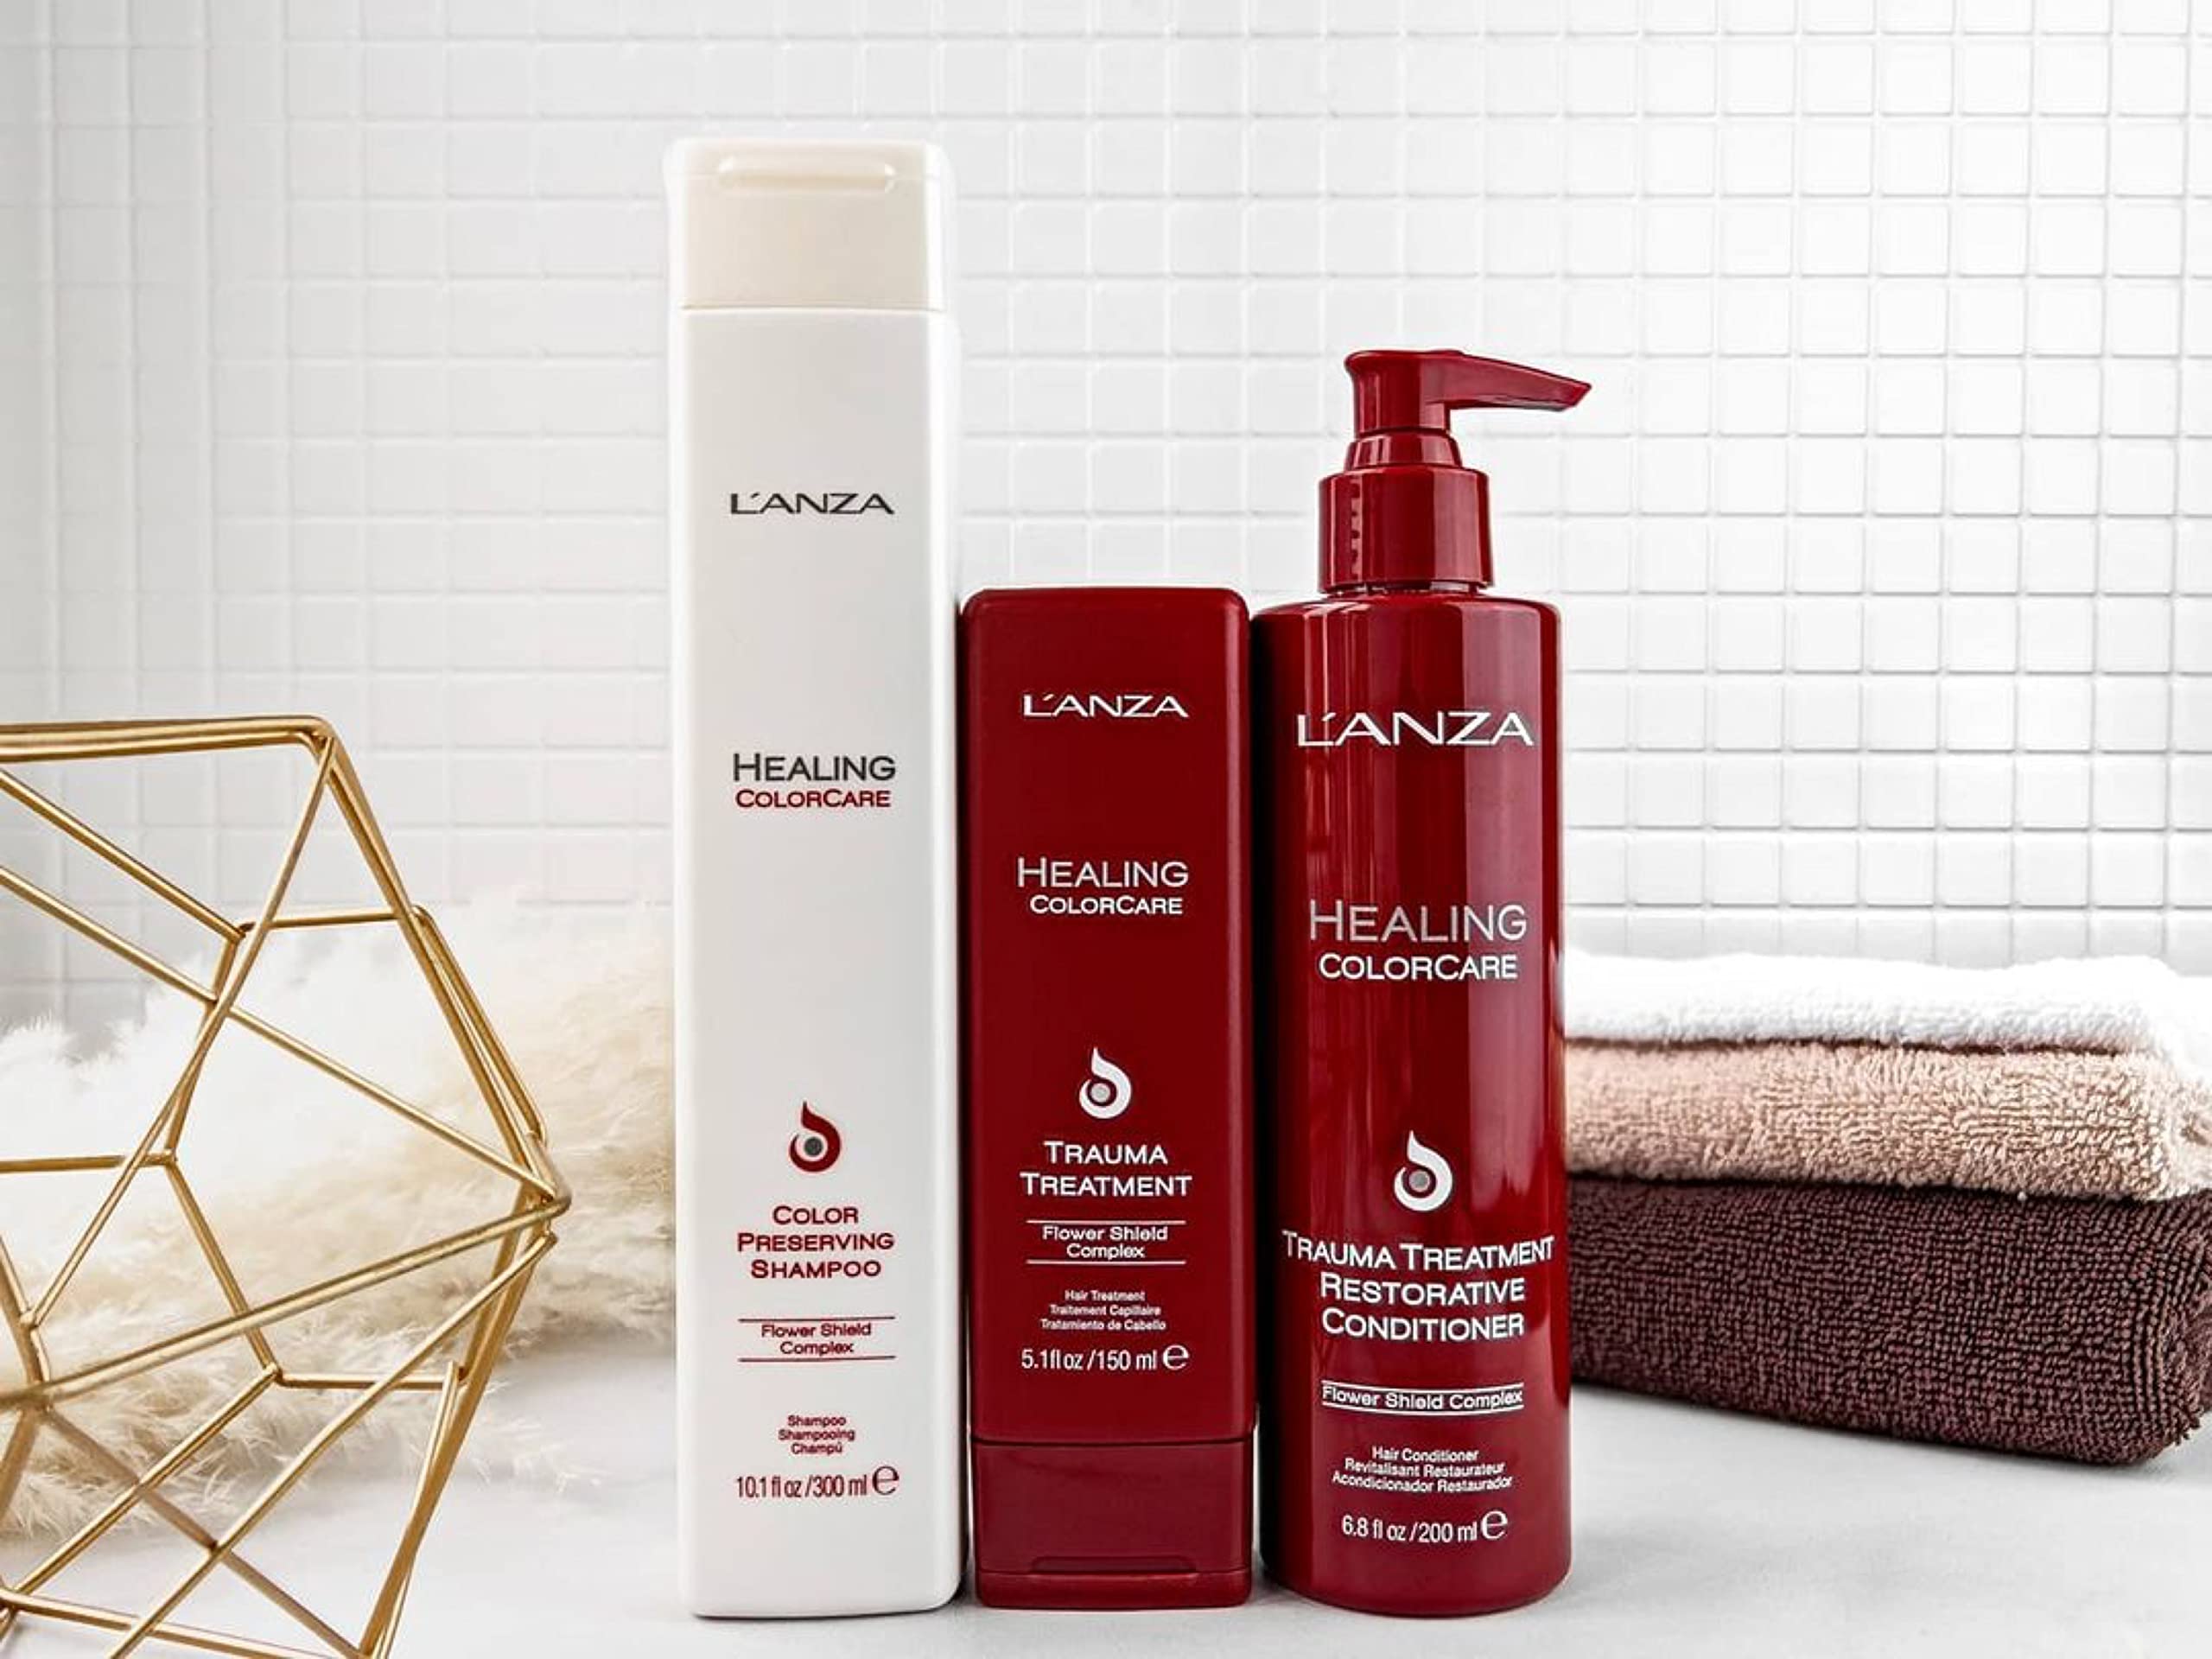 Healing ColorCare Trauma Treatment Restorative Conditioner Refreshes Repairs and Smooths Bleach Damaged Hair while Extending Color Longevity